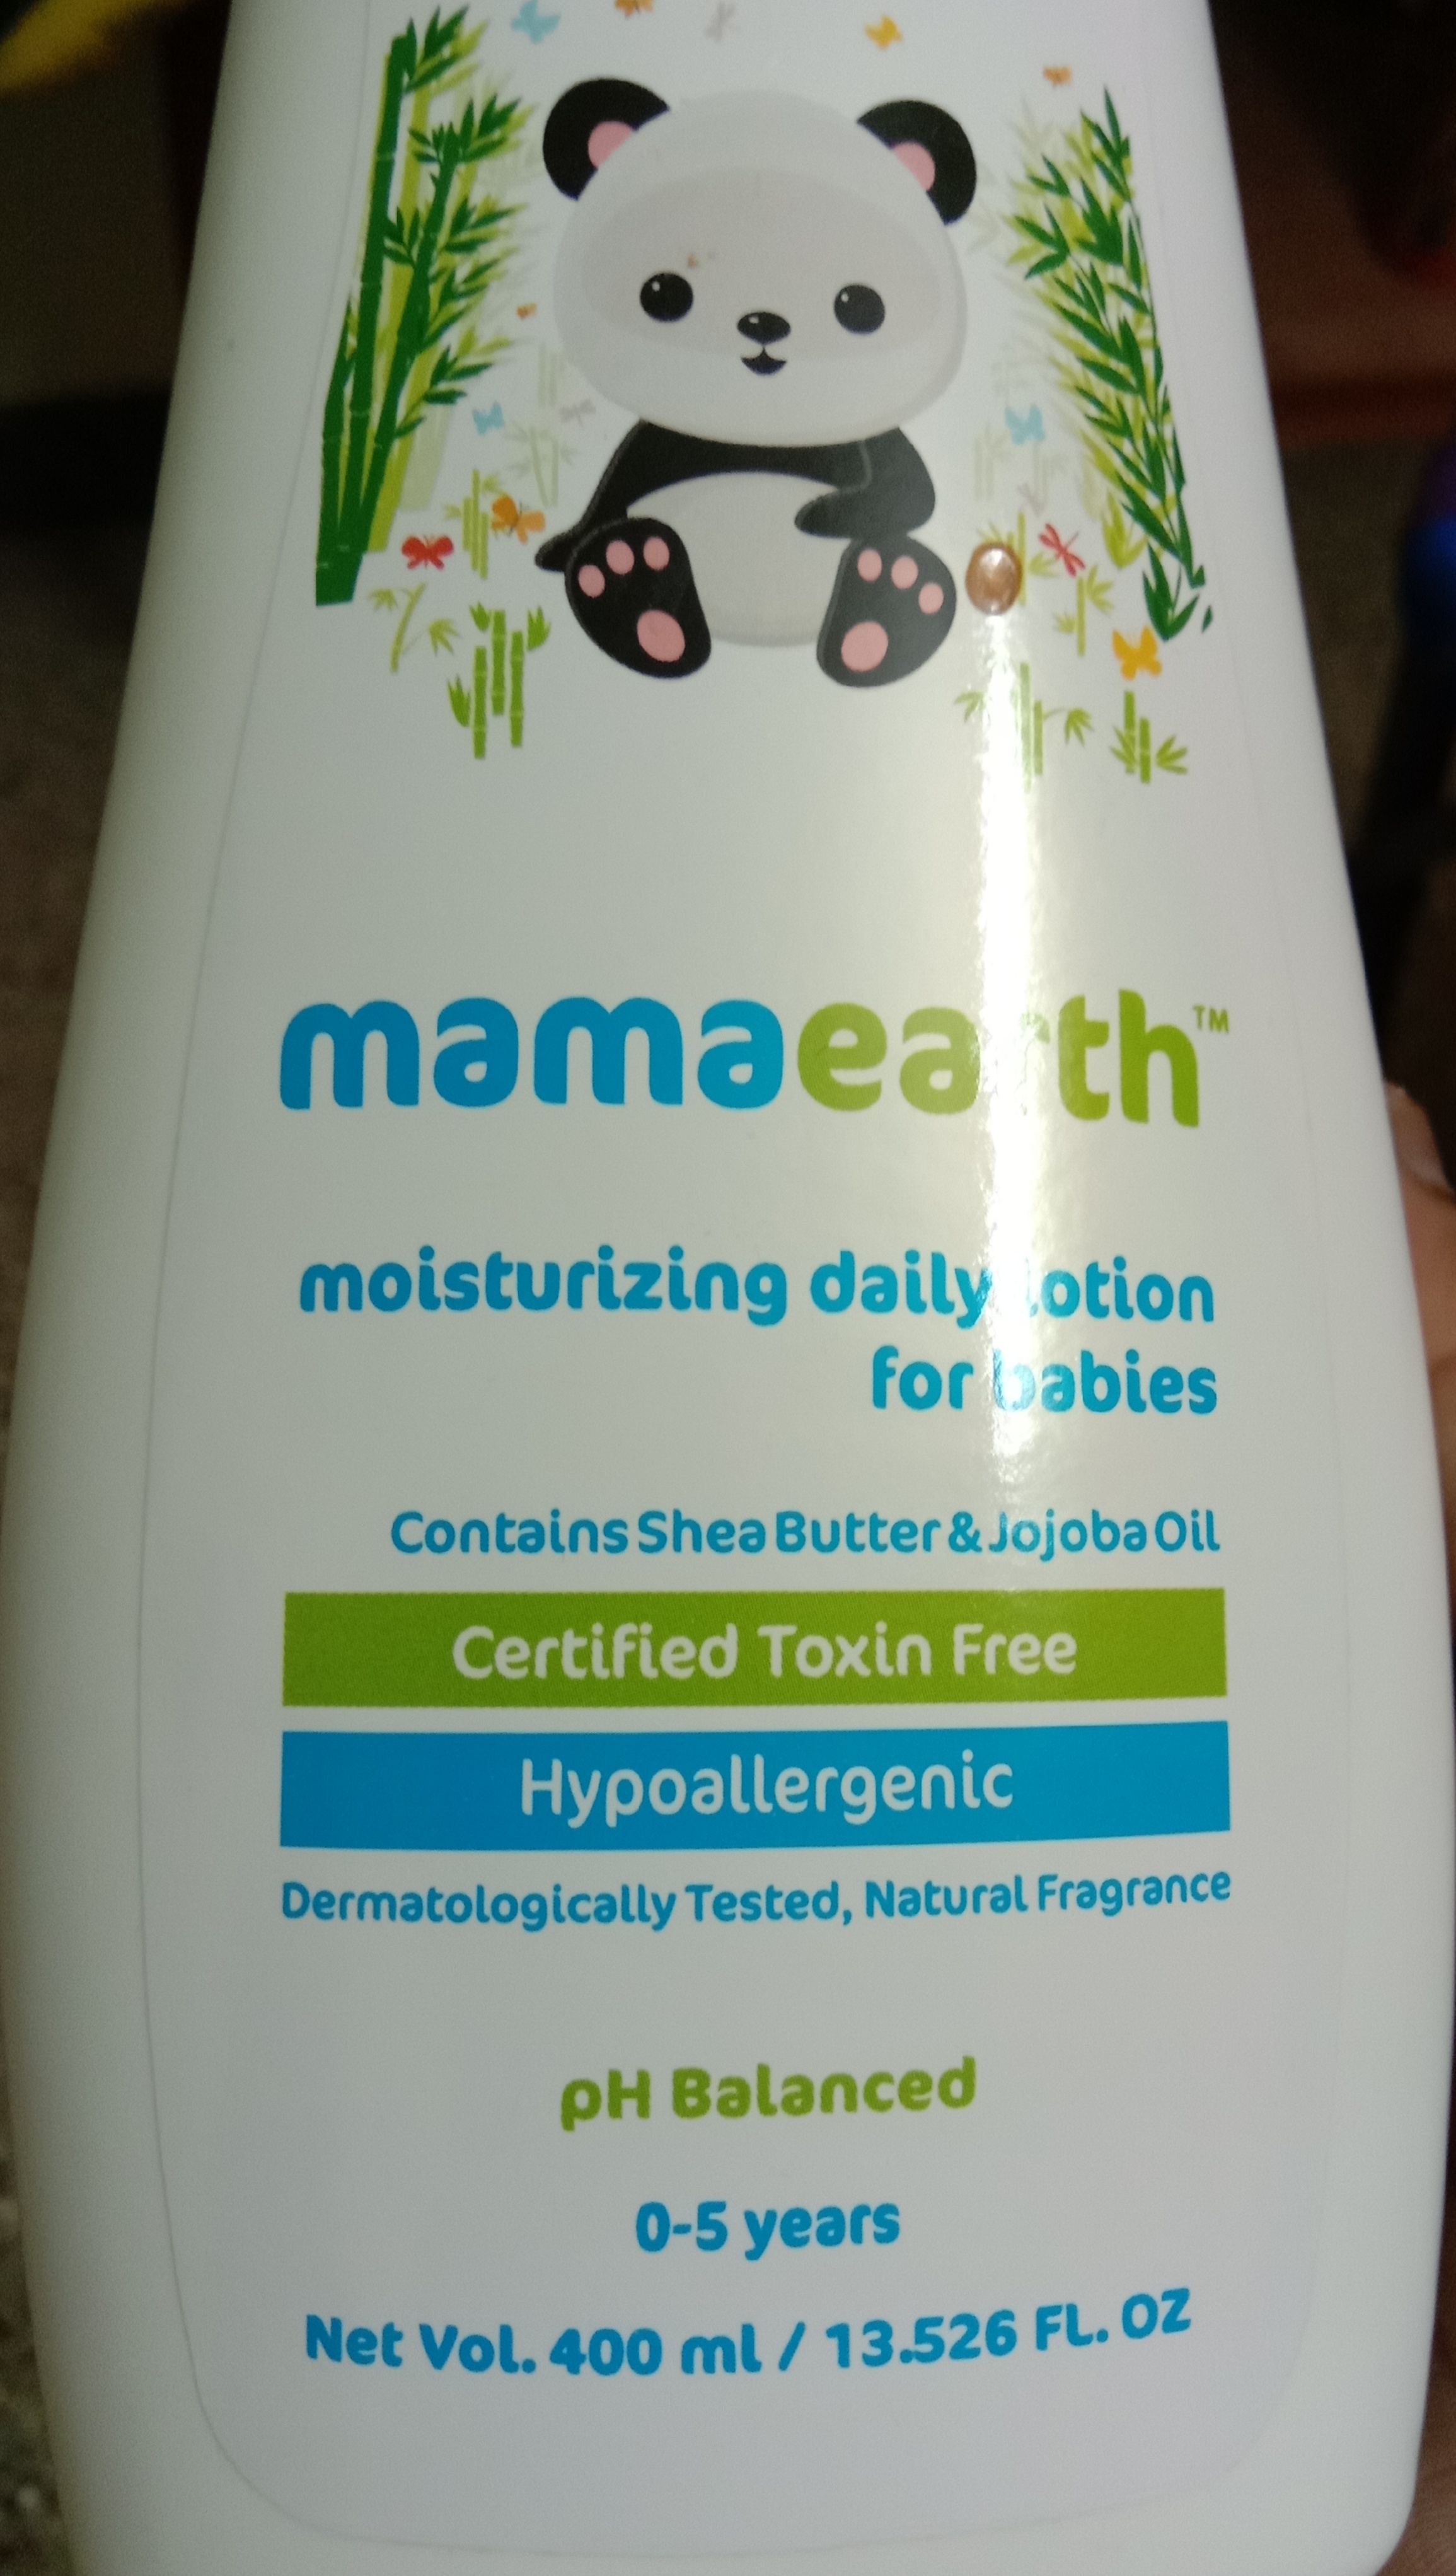 Mamaearth Daily Moisturizing Lotion and Mineral Based Sunscreen-Smooth lotion-By kalyanilkesavan